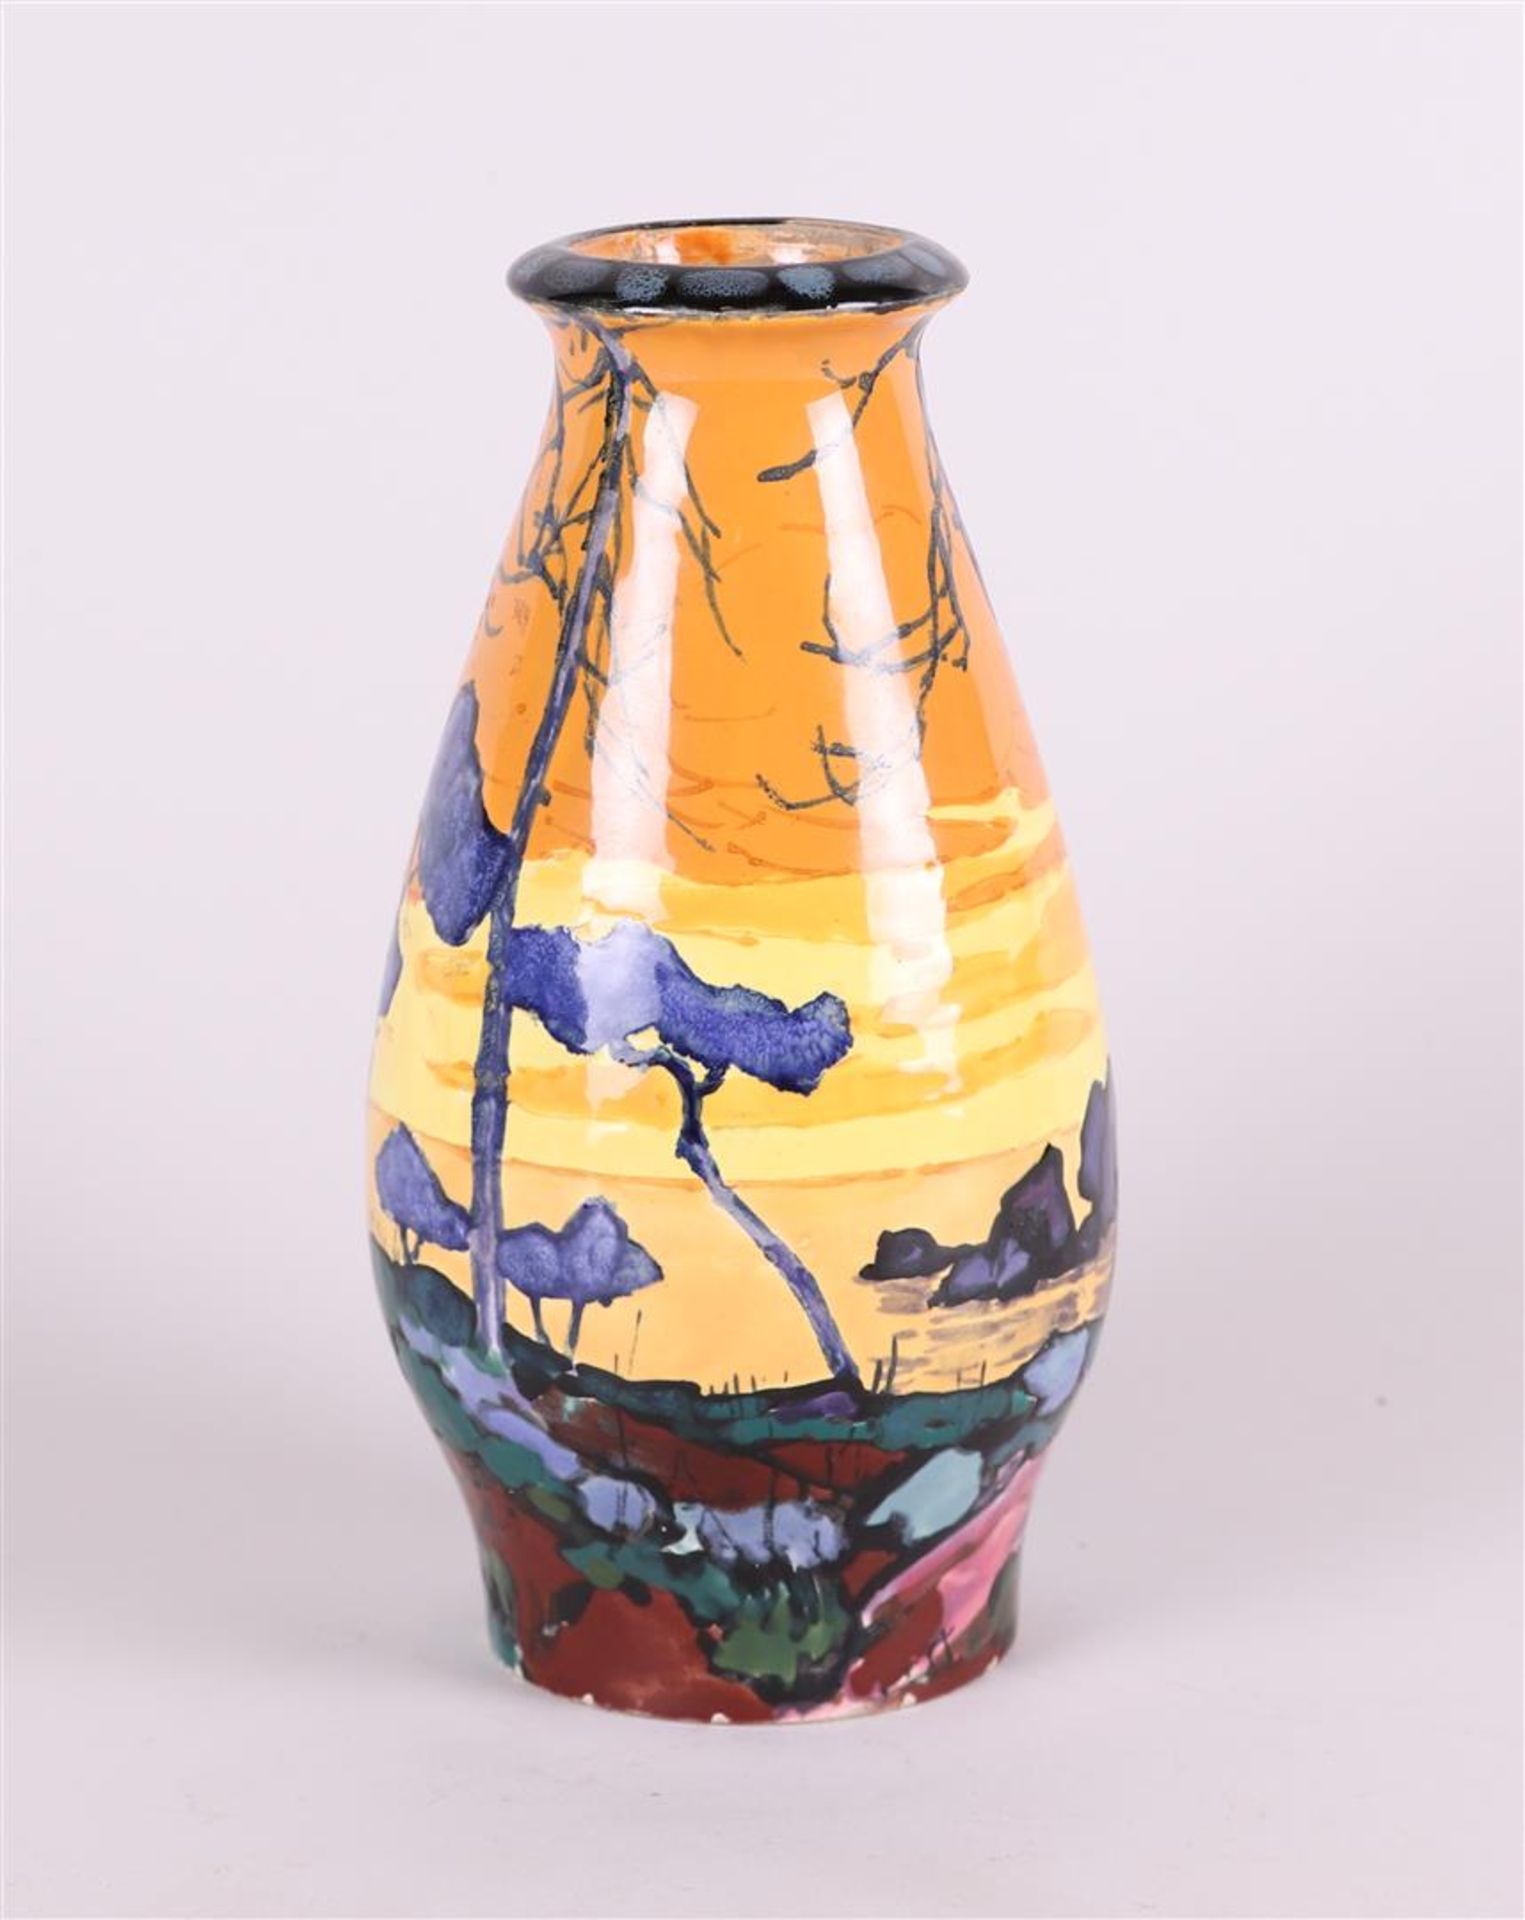 A Faience polychrome painted vase, marked Valluaris. France, early 20th century.